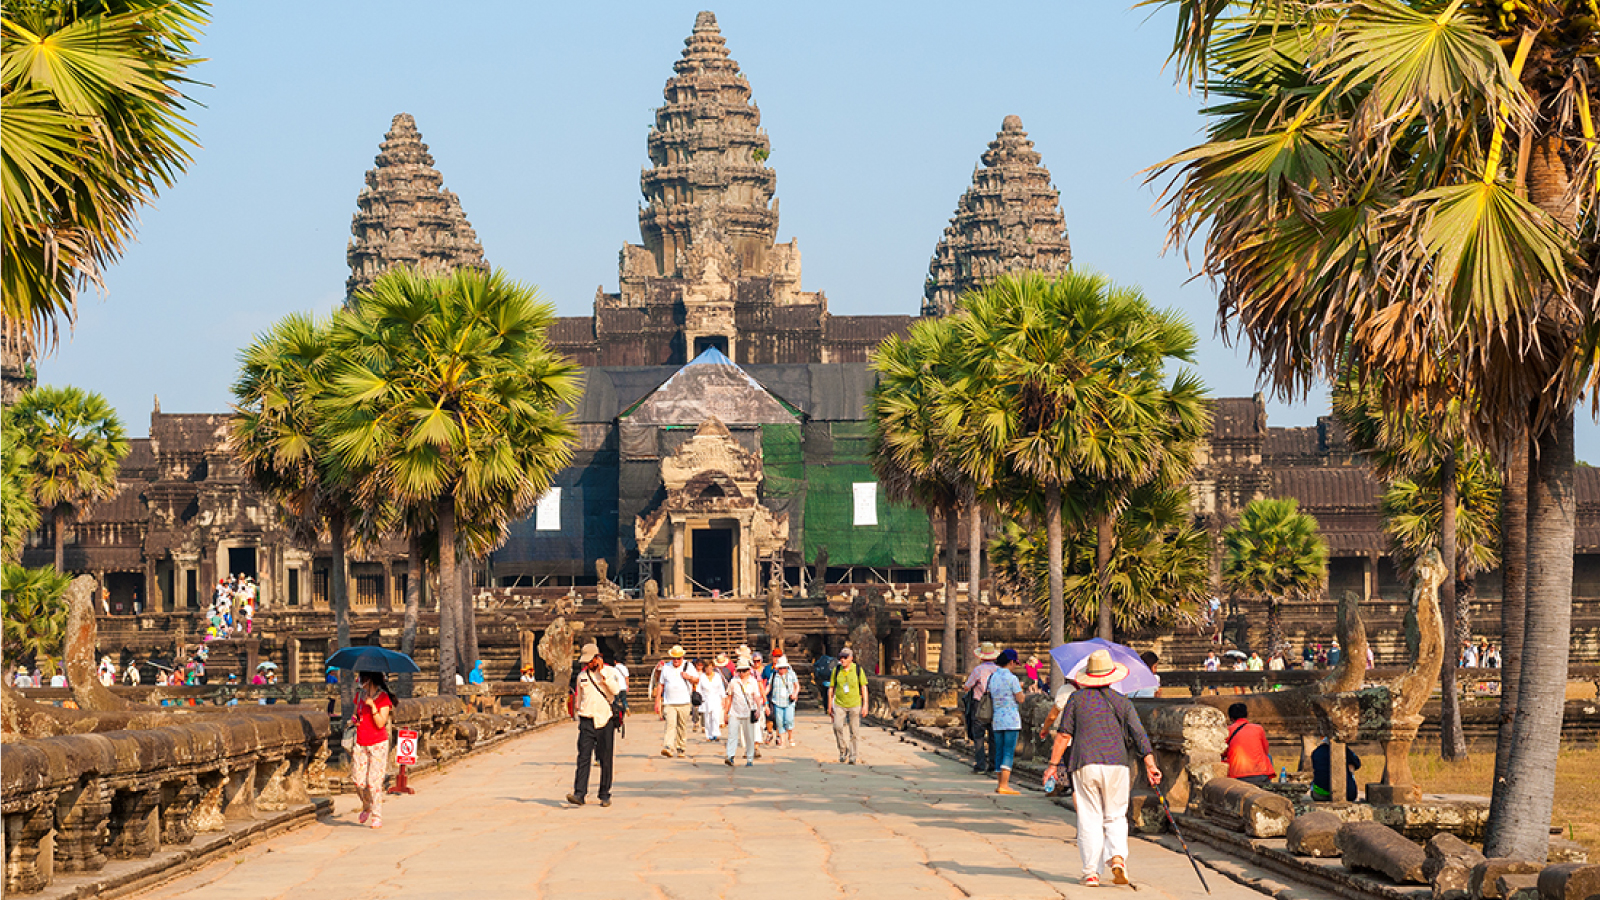 cambodia-in-brief-a-quick-guide-to-siem-reap-wide-eyed-tours